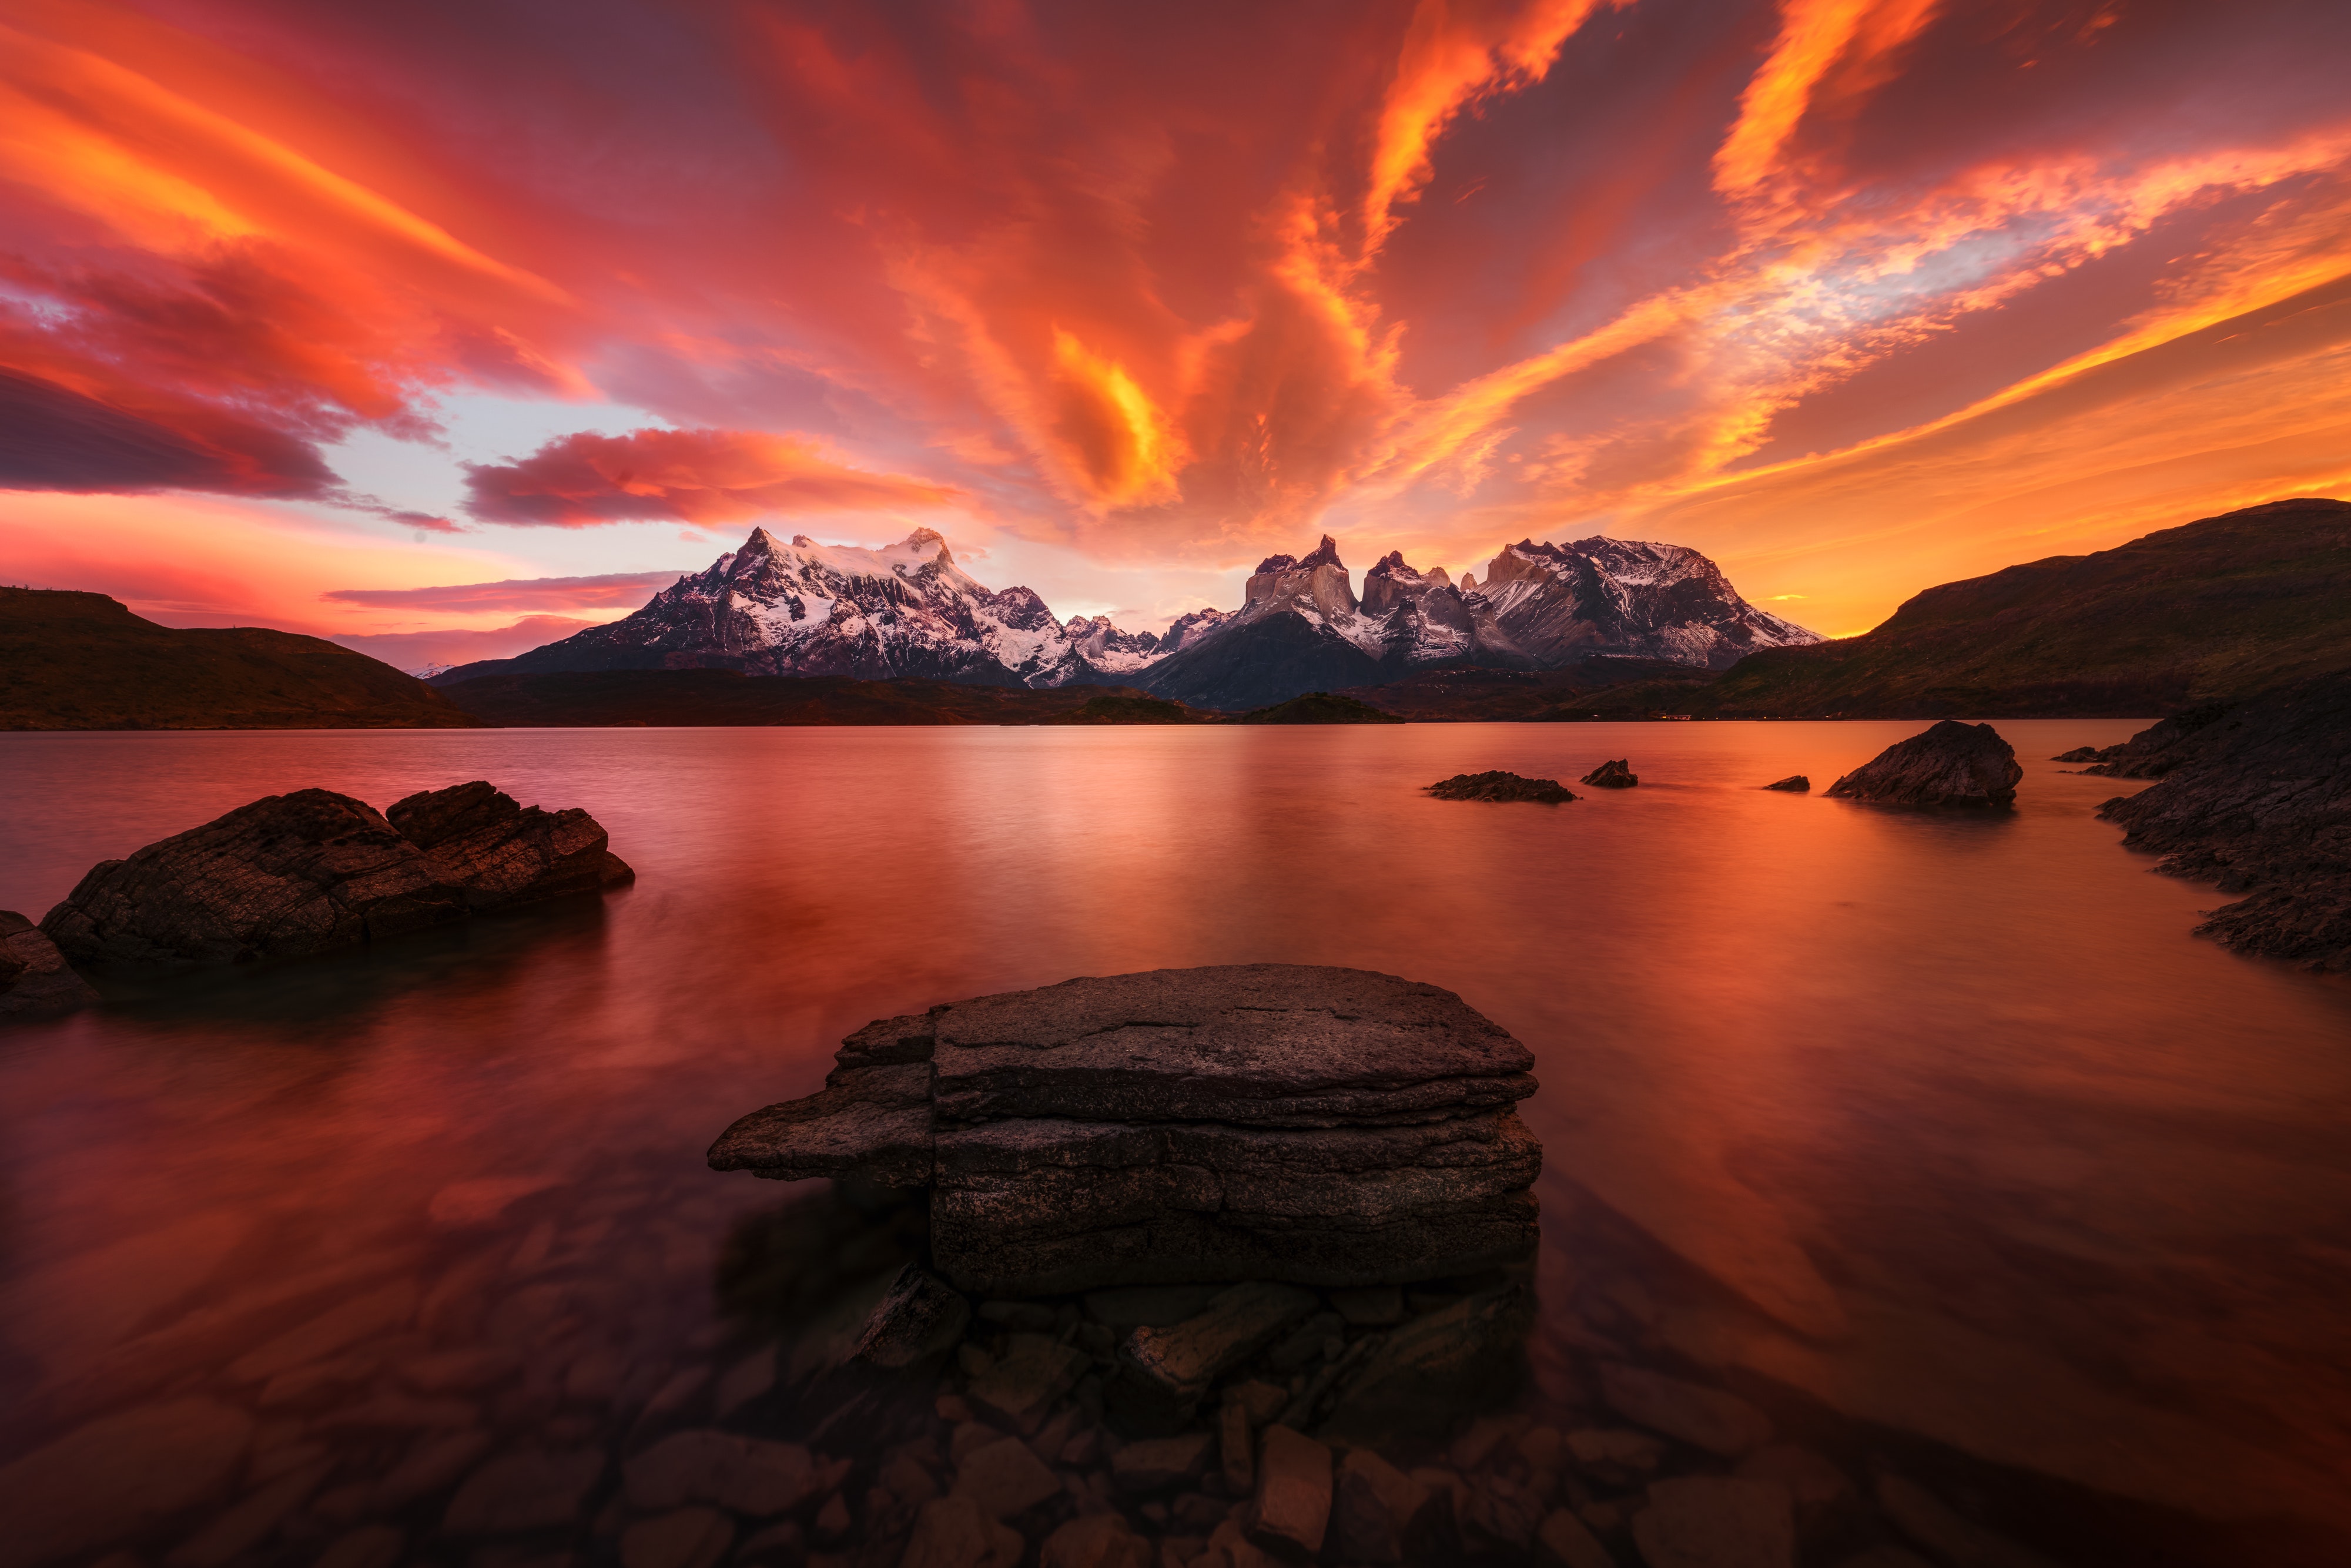 General 4000x2668 Patagonia Argentina sunset landscape mountains clouds lake sky photography